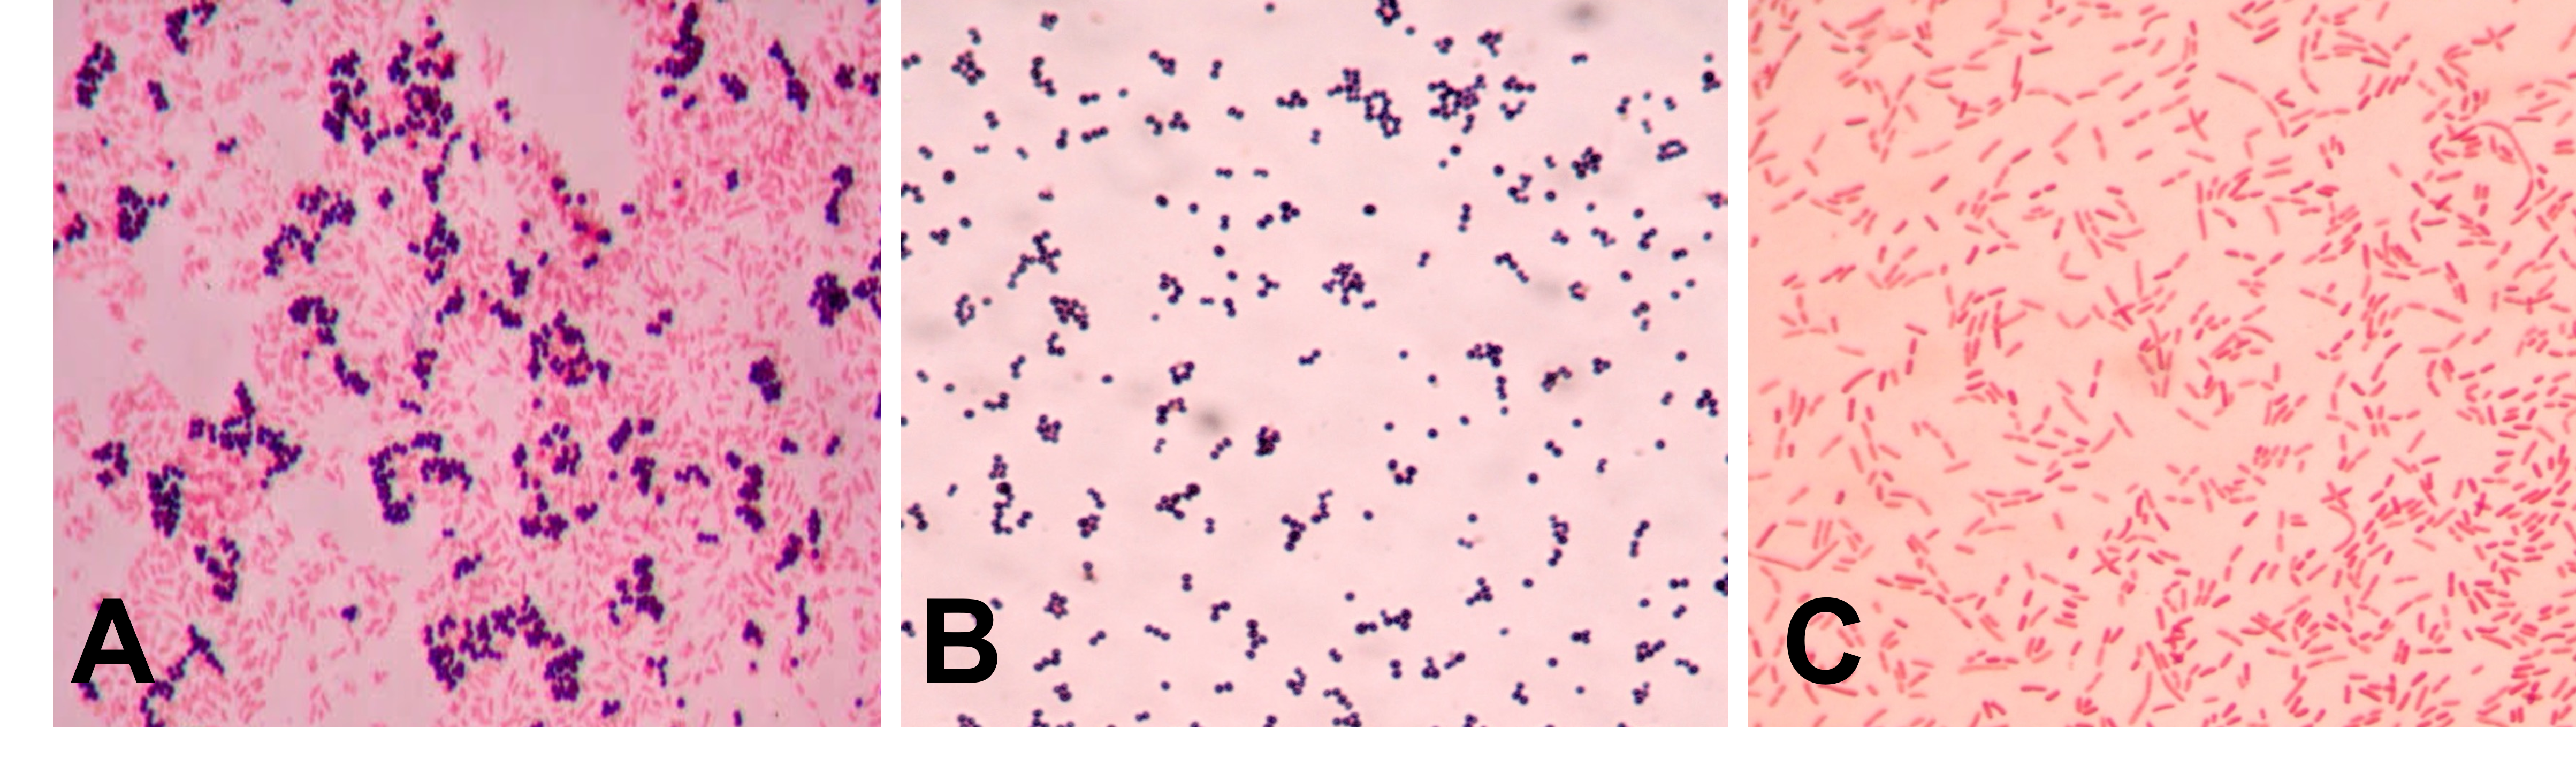 Gram stain composite figure showing three different images compiled into a single figure of three different Gram stains